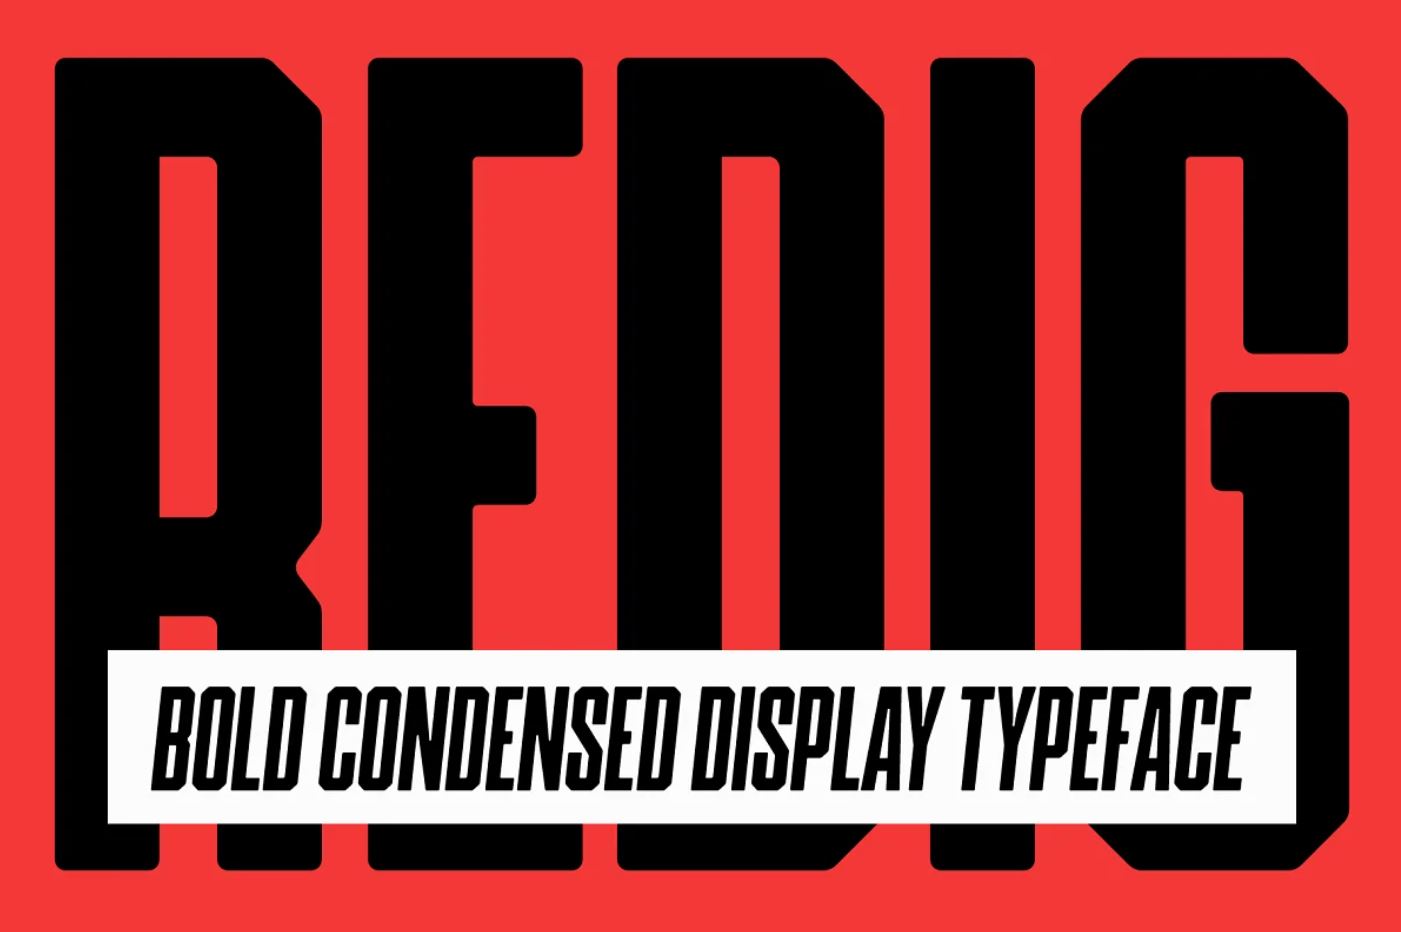 Bold Condensed Display Typeface Download